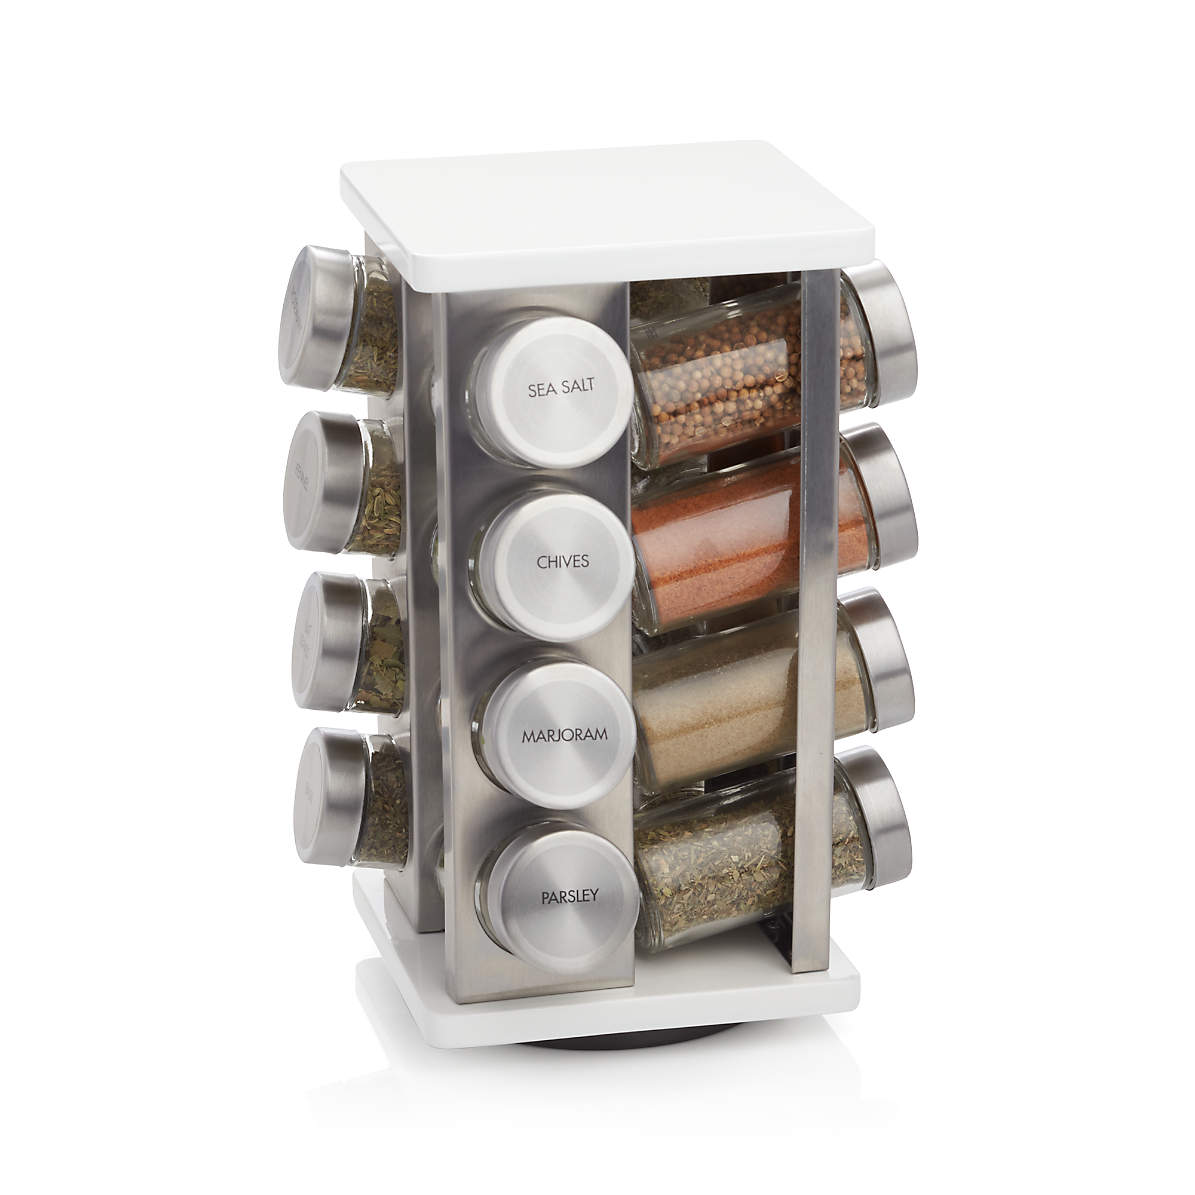 Kamenstein Good Spice 6-Jar Italian Crate Spice Rack in White, Spices and  Jars Included